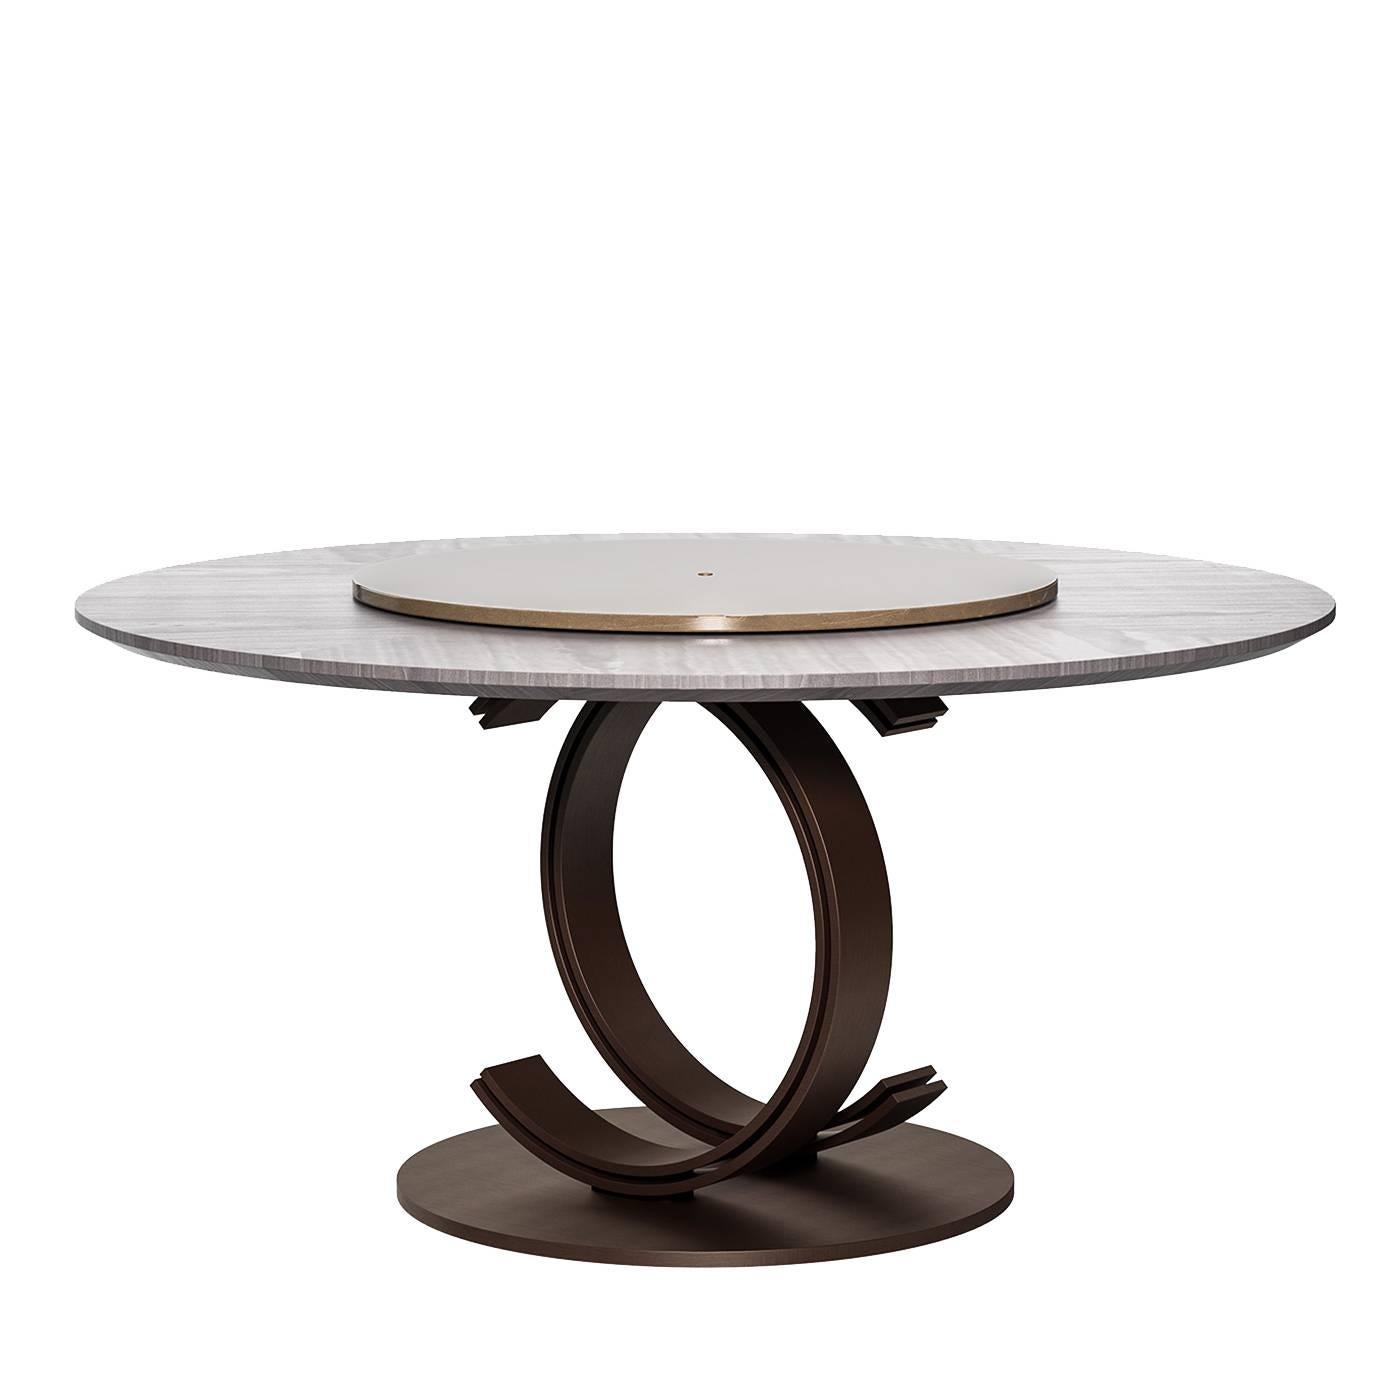 Bluemoon Round Dining Table